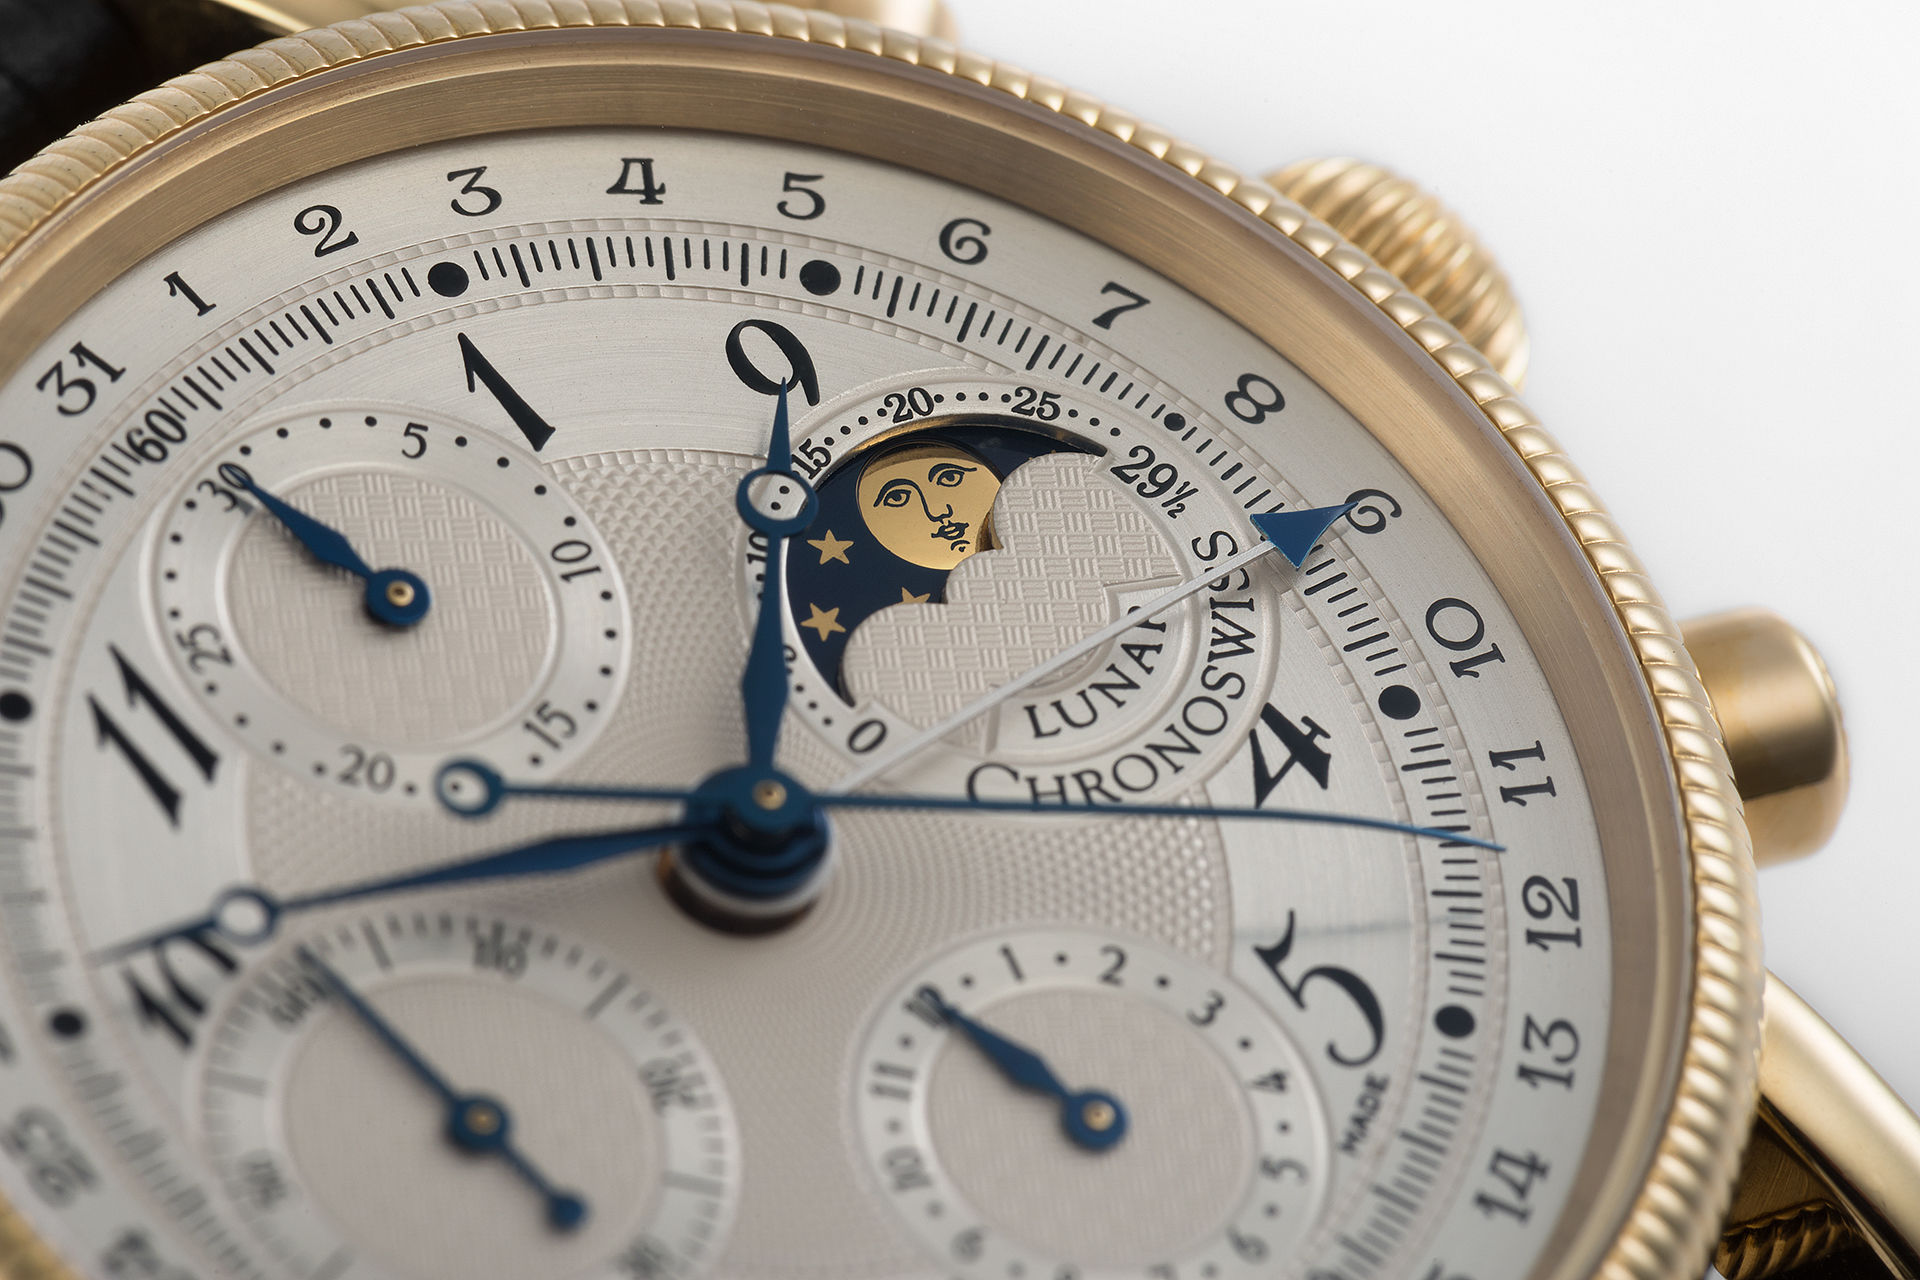 ref CH 7521 | Yellow Gold 'Moonphase' | Chronoswiss Lunar Chronograph